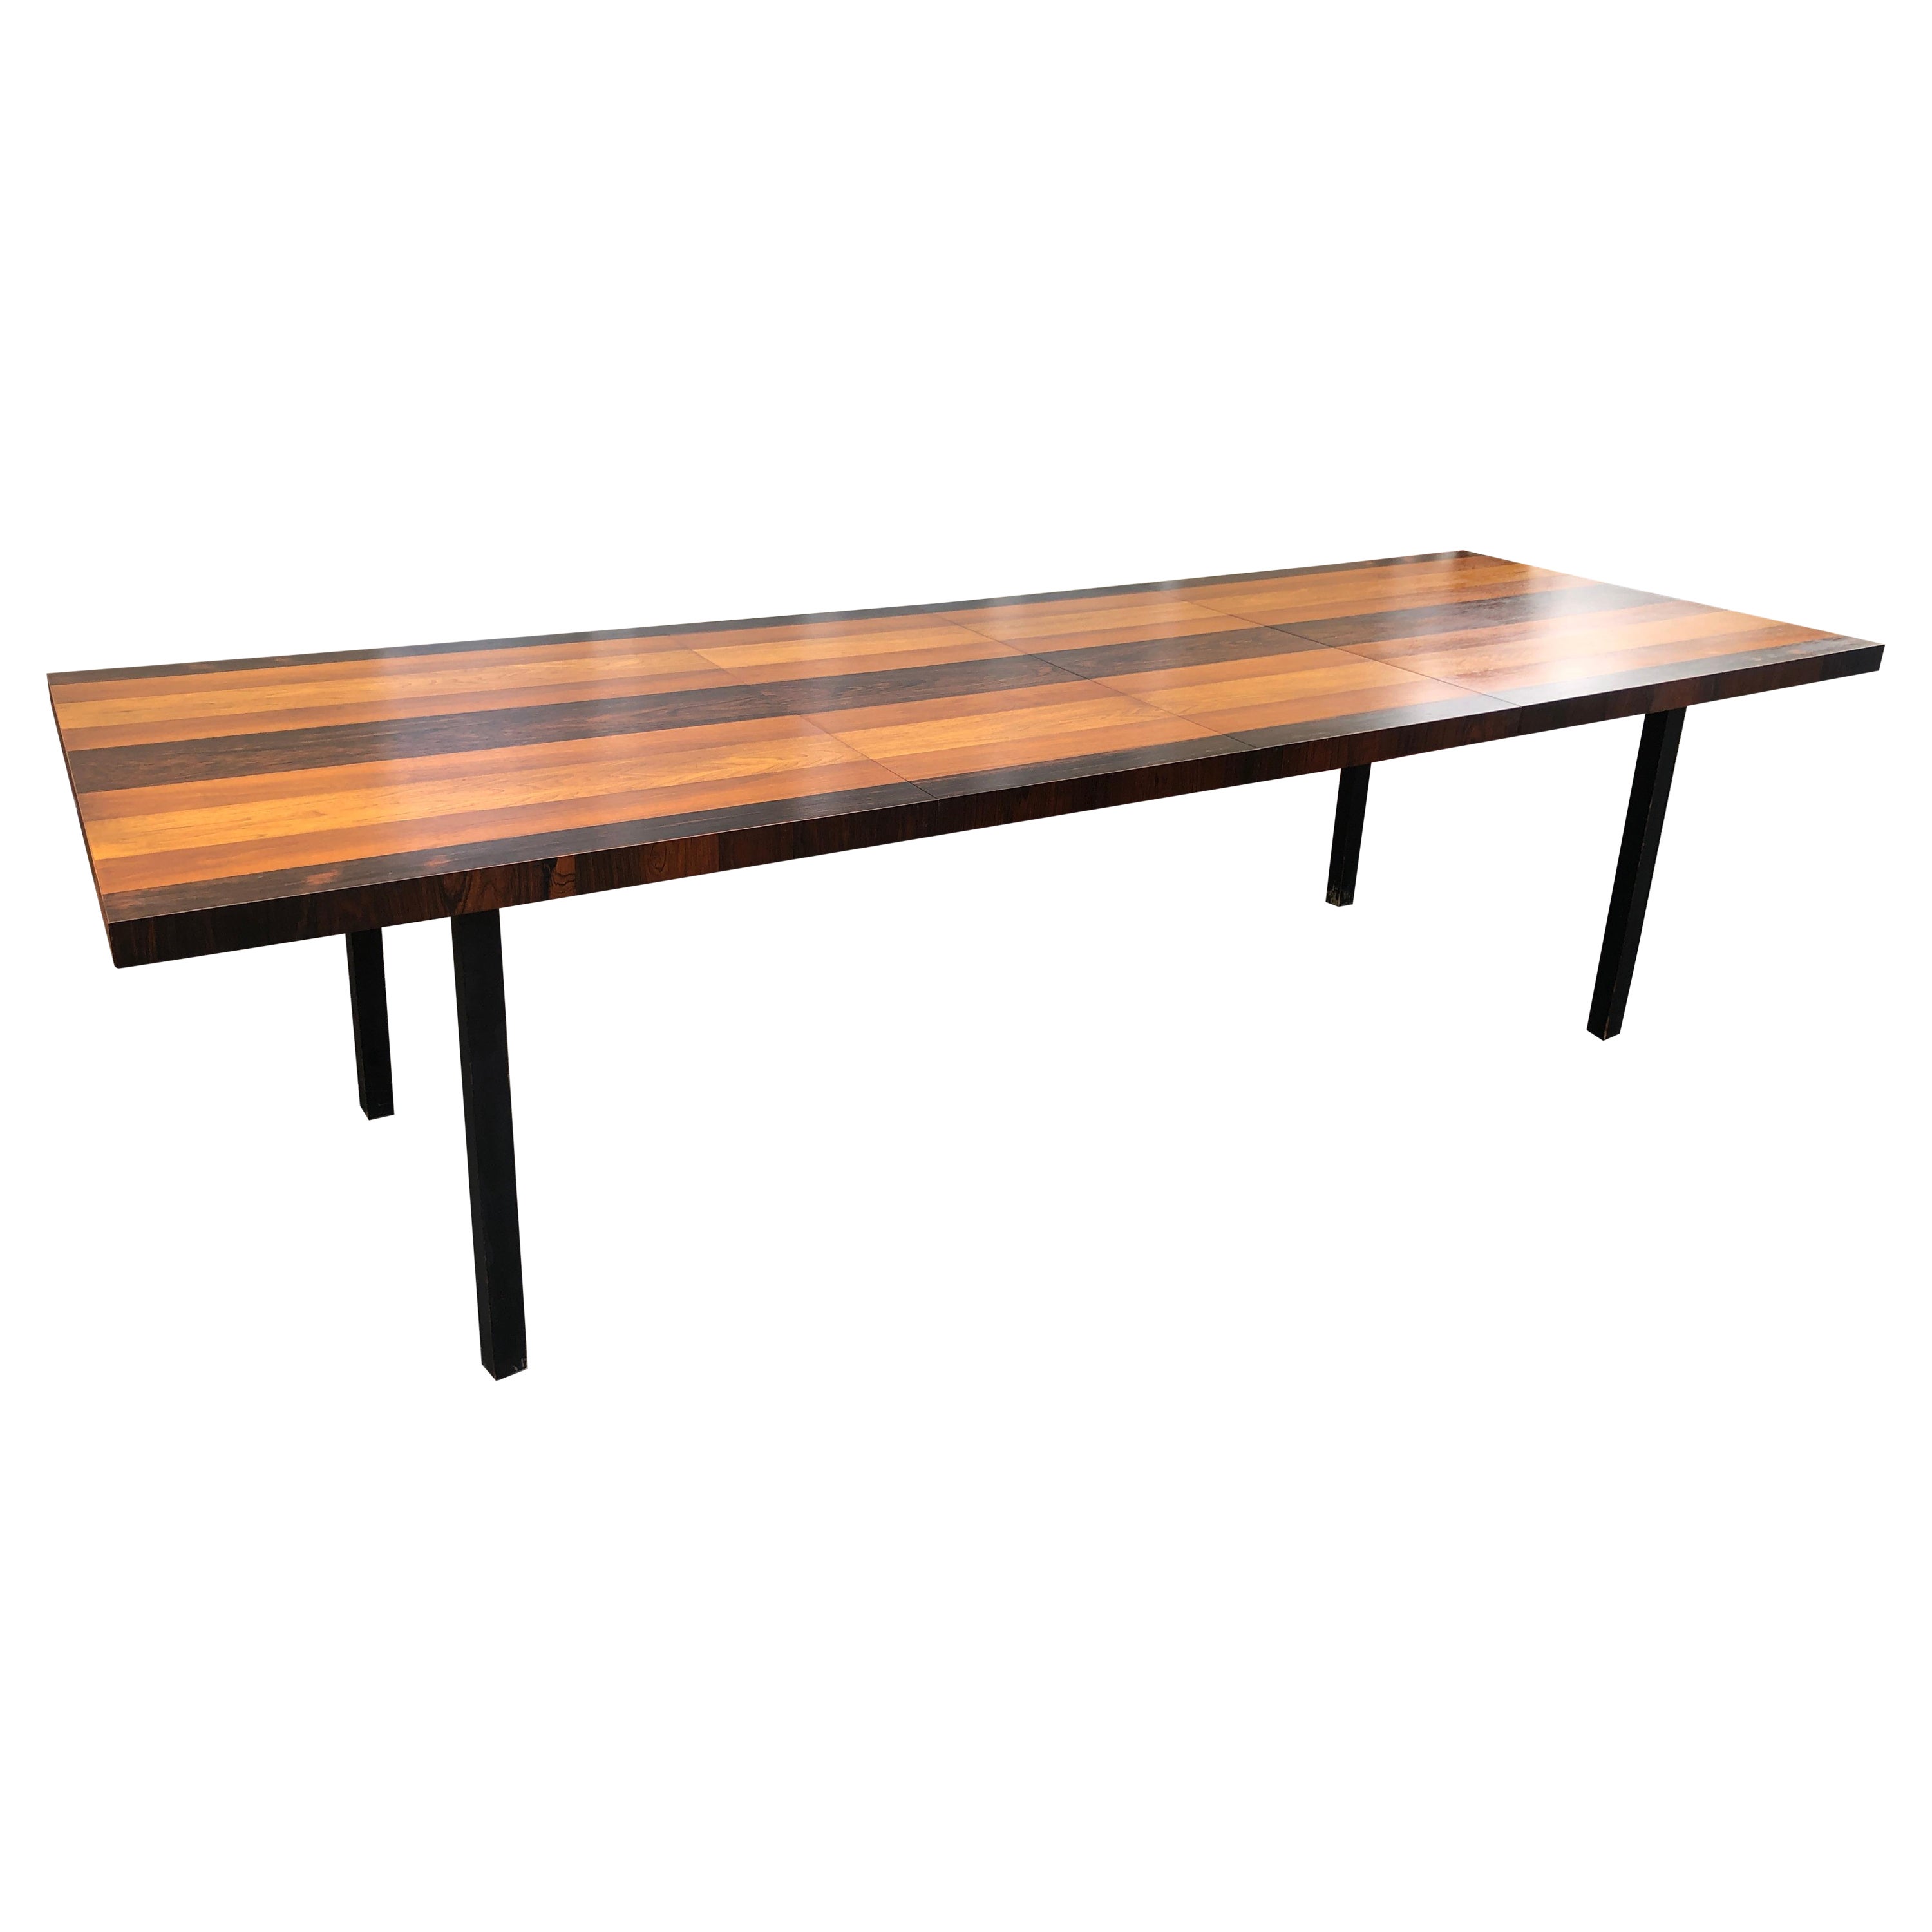 Marvelous Milo Baughman for Directional Multi Wood Dining Table Mid-Century 